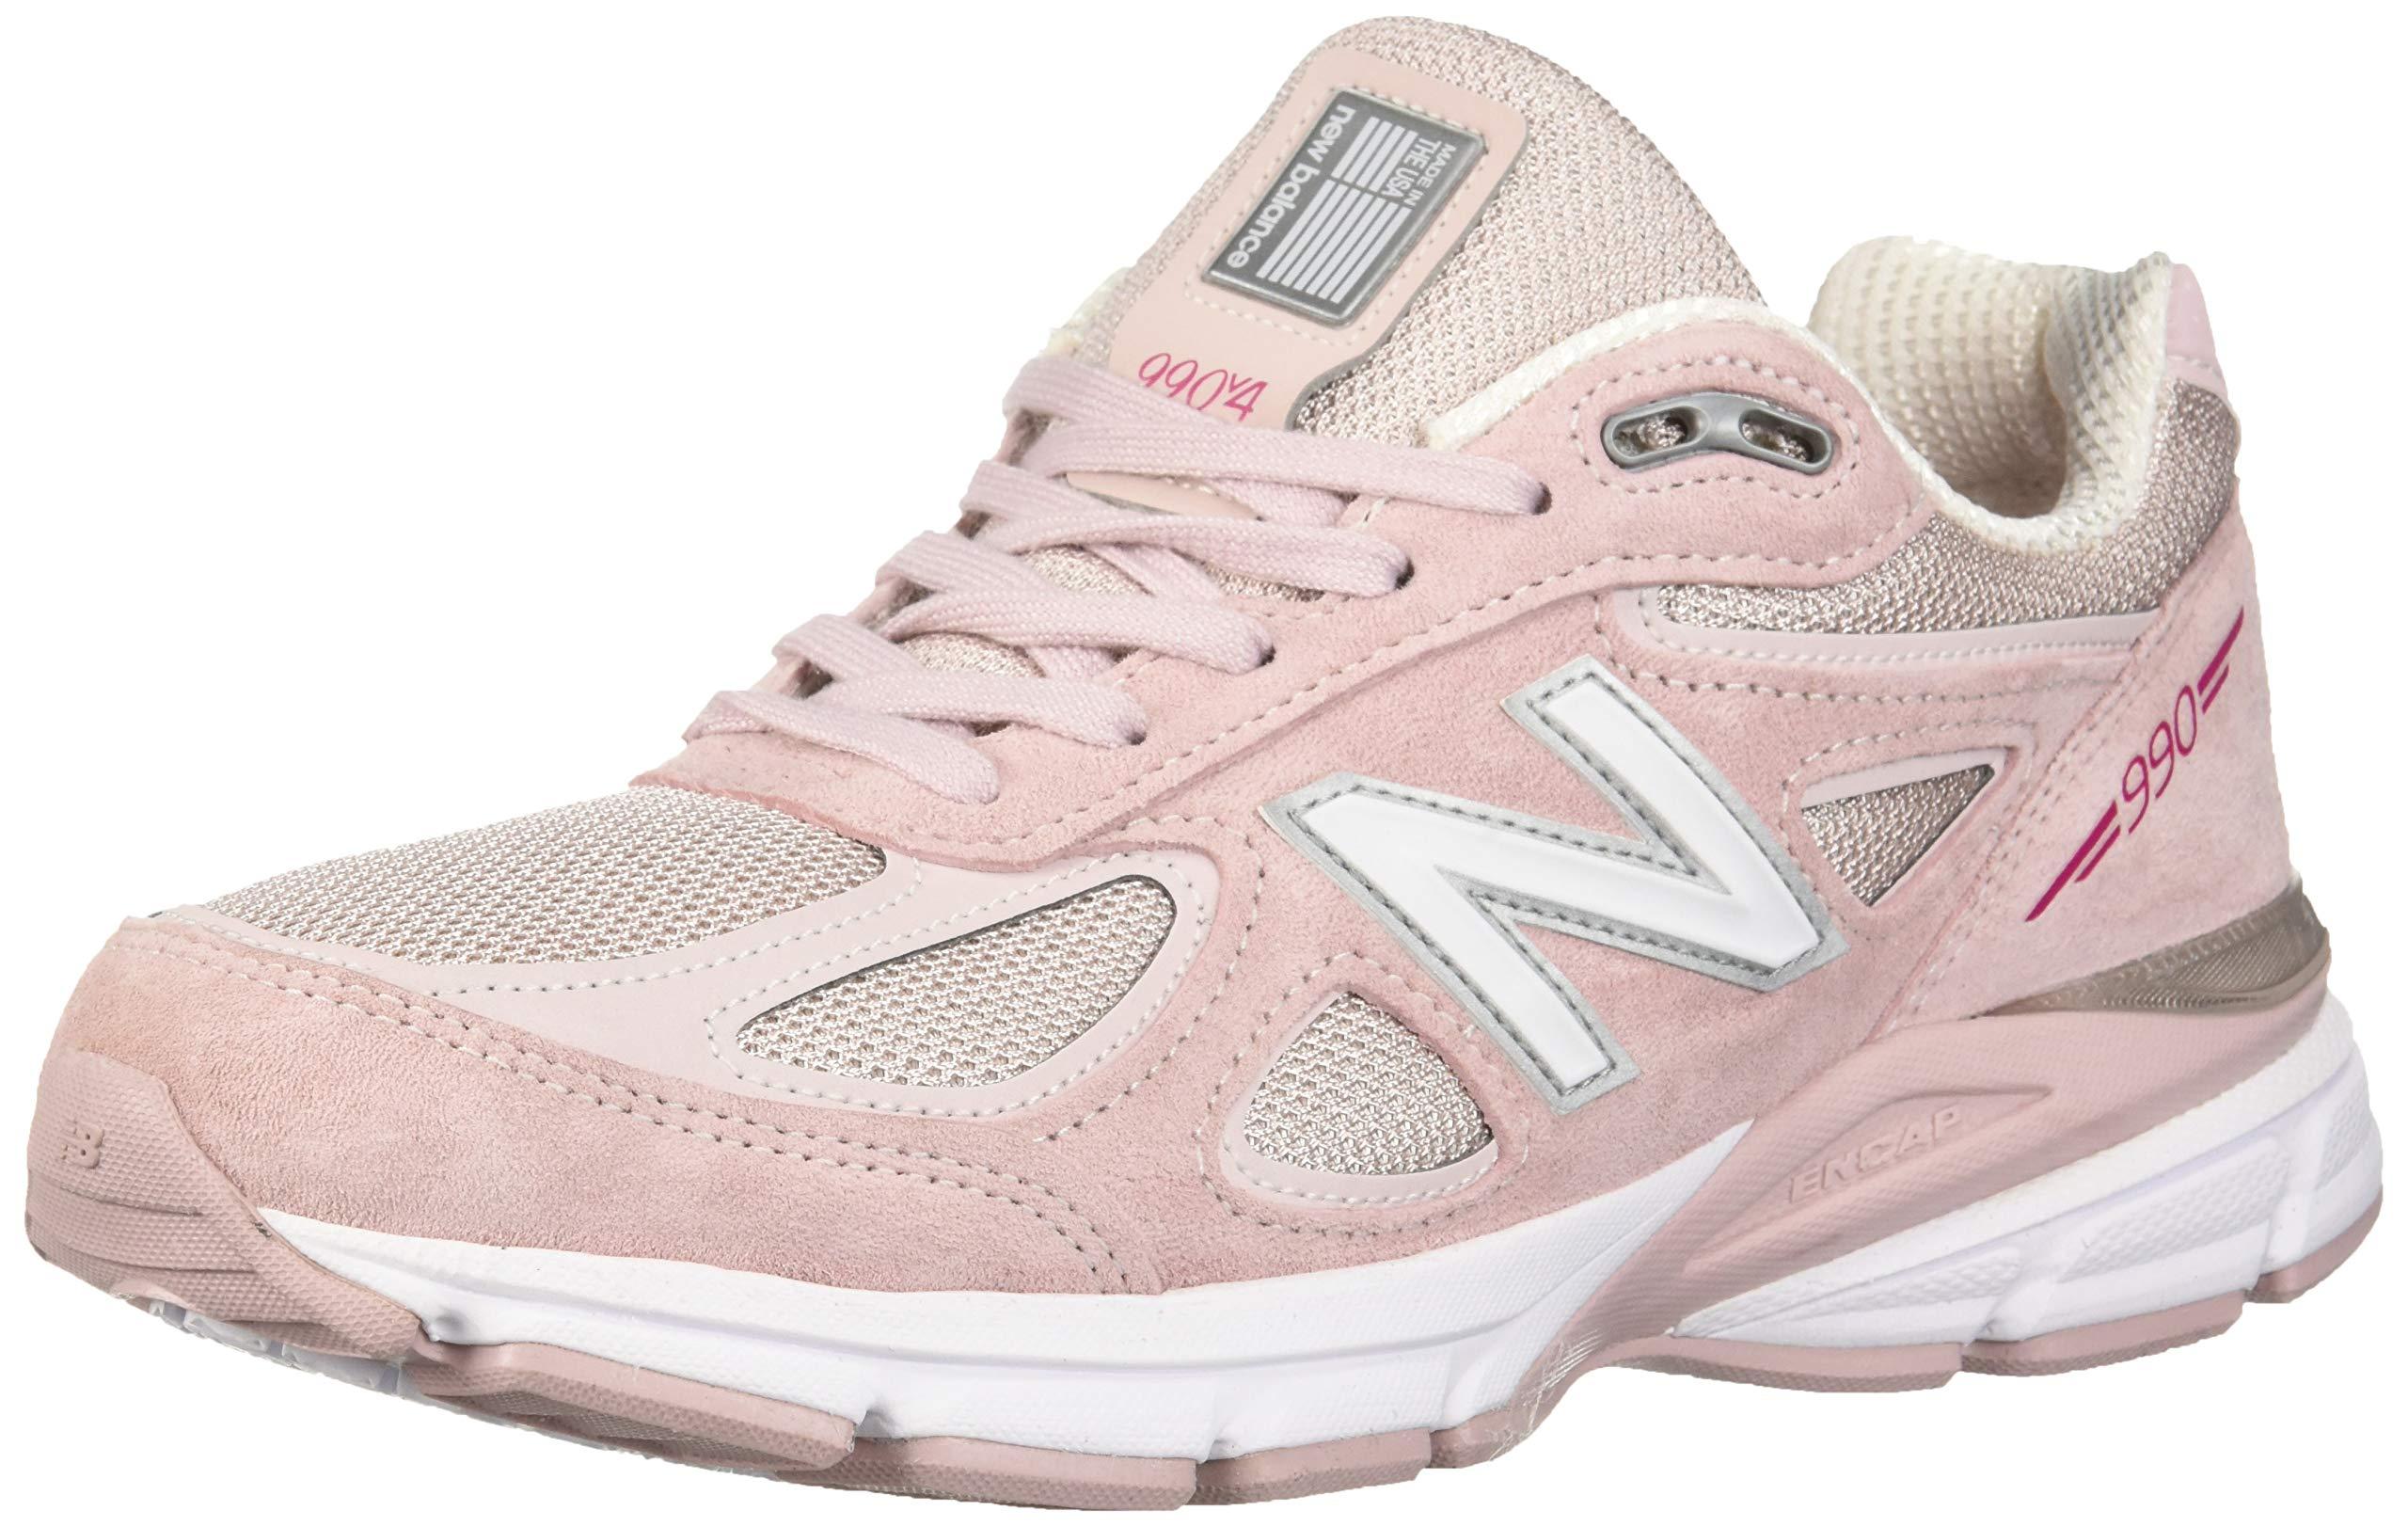 New Balance Made 990 V4 Sneaker in Pink for Men - Save 40% | Lyst